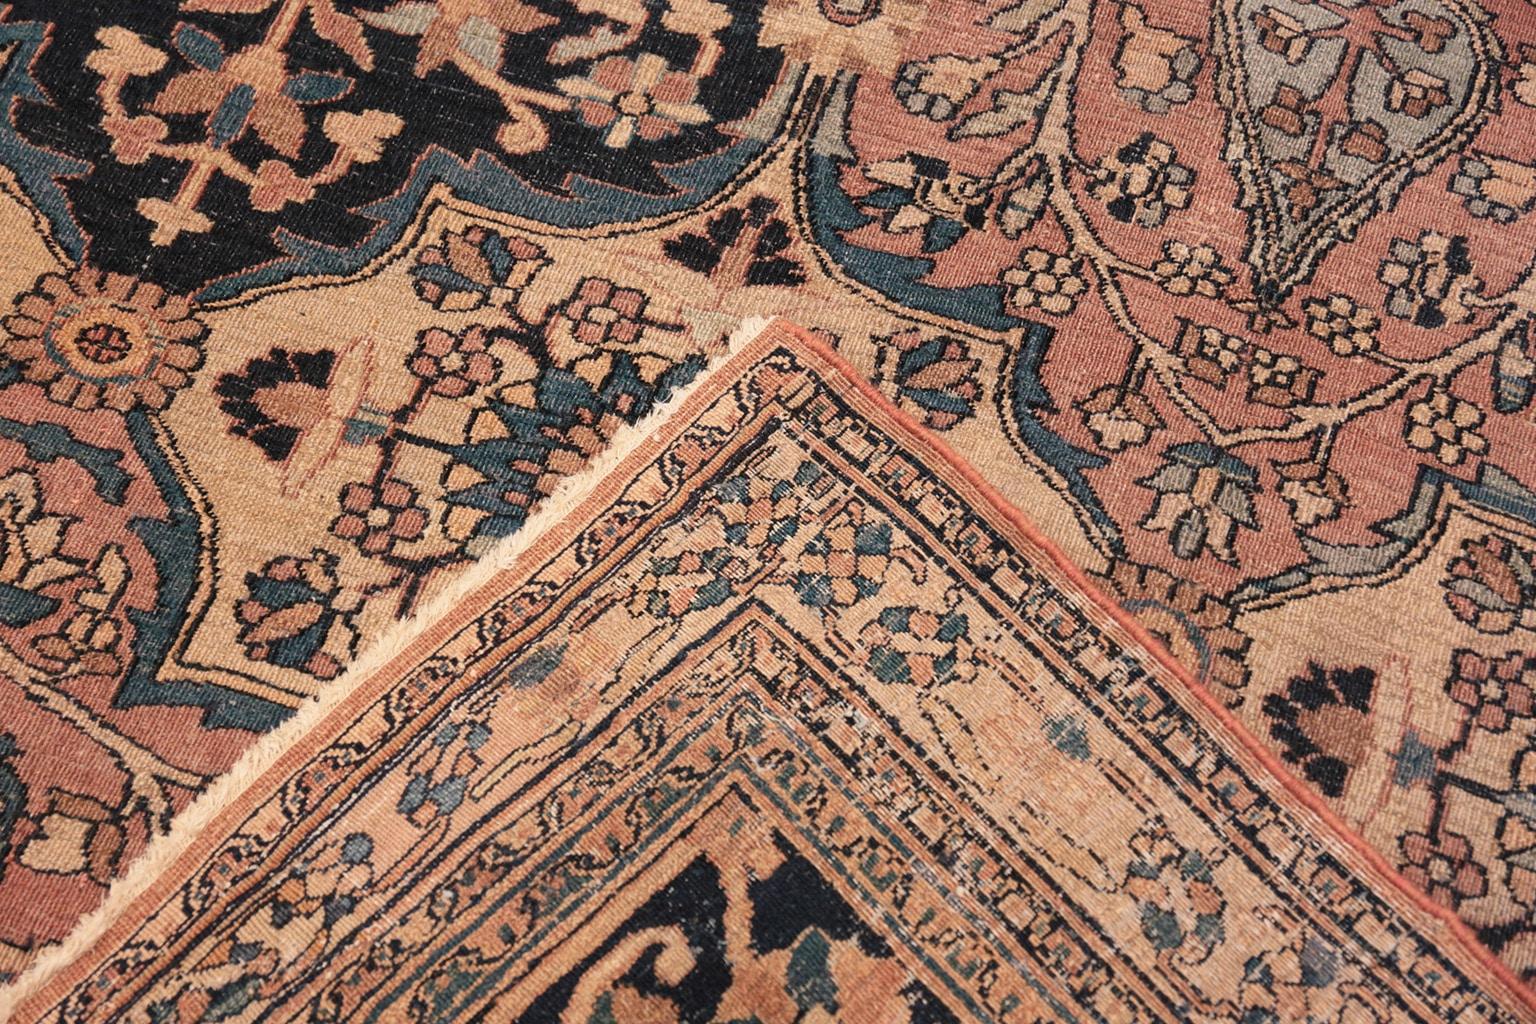 Antique Persian Khorassan Rug. Size: 12 ft 4 in x 15 ft 9 in (3.76 m x 4.8 m) 1